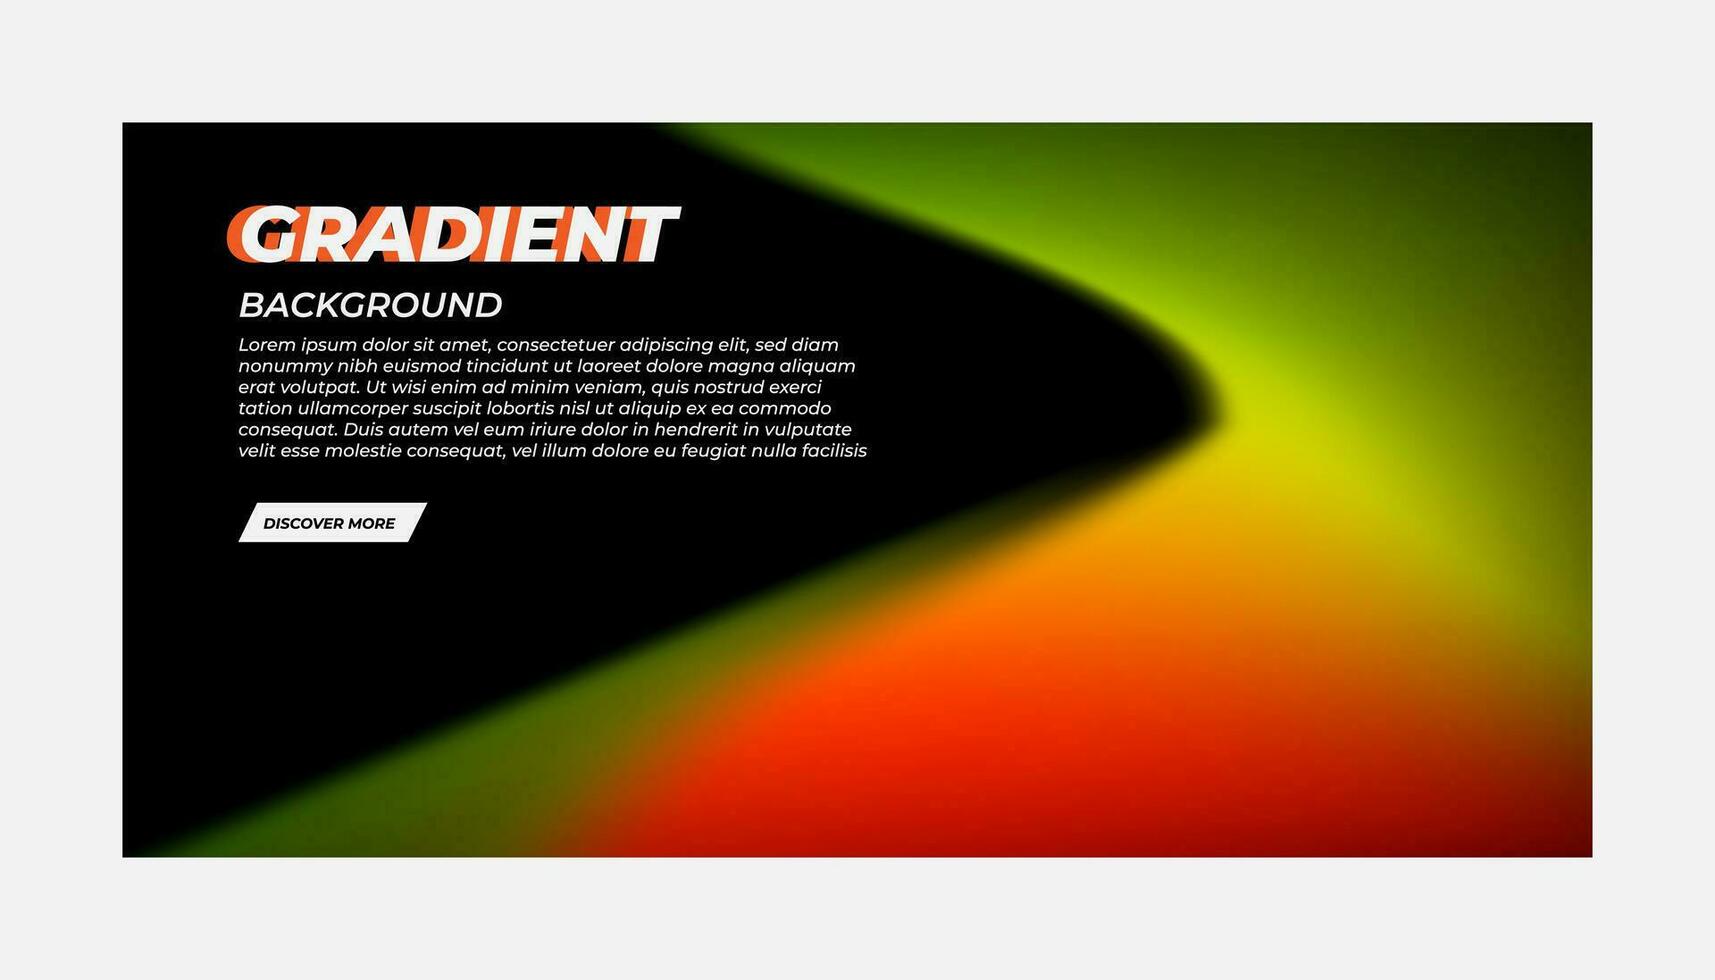 Modern Background Design with Gradient and Grain Texture. Minimalist Gradient Background with geometric shapes for Website design, landing page, wallpaper, banner, poster, flyer, and presentation vector